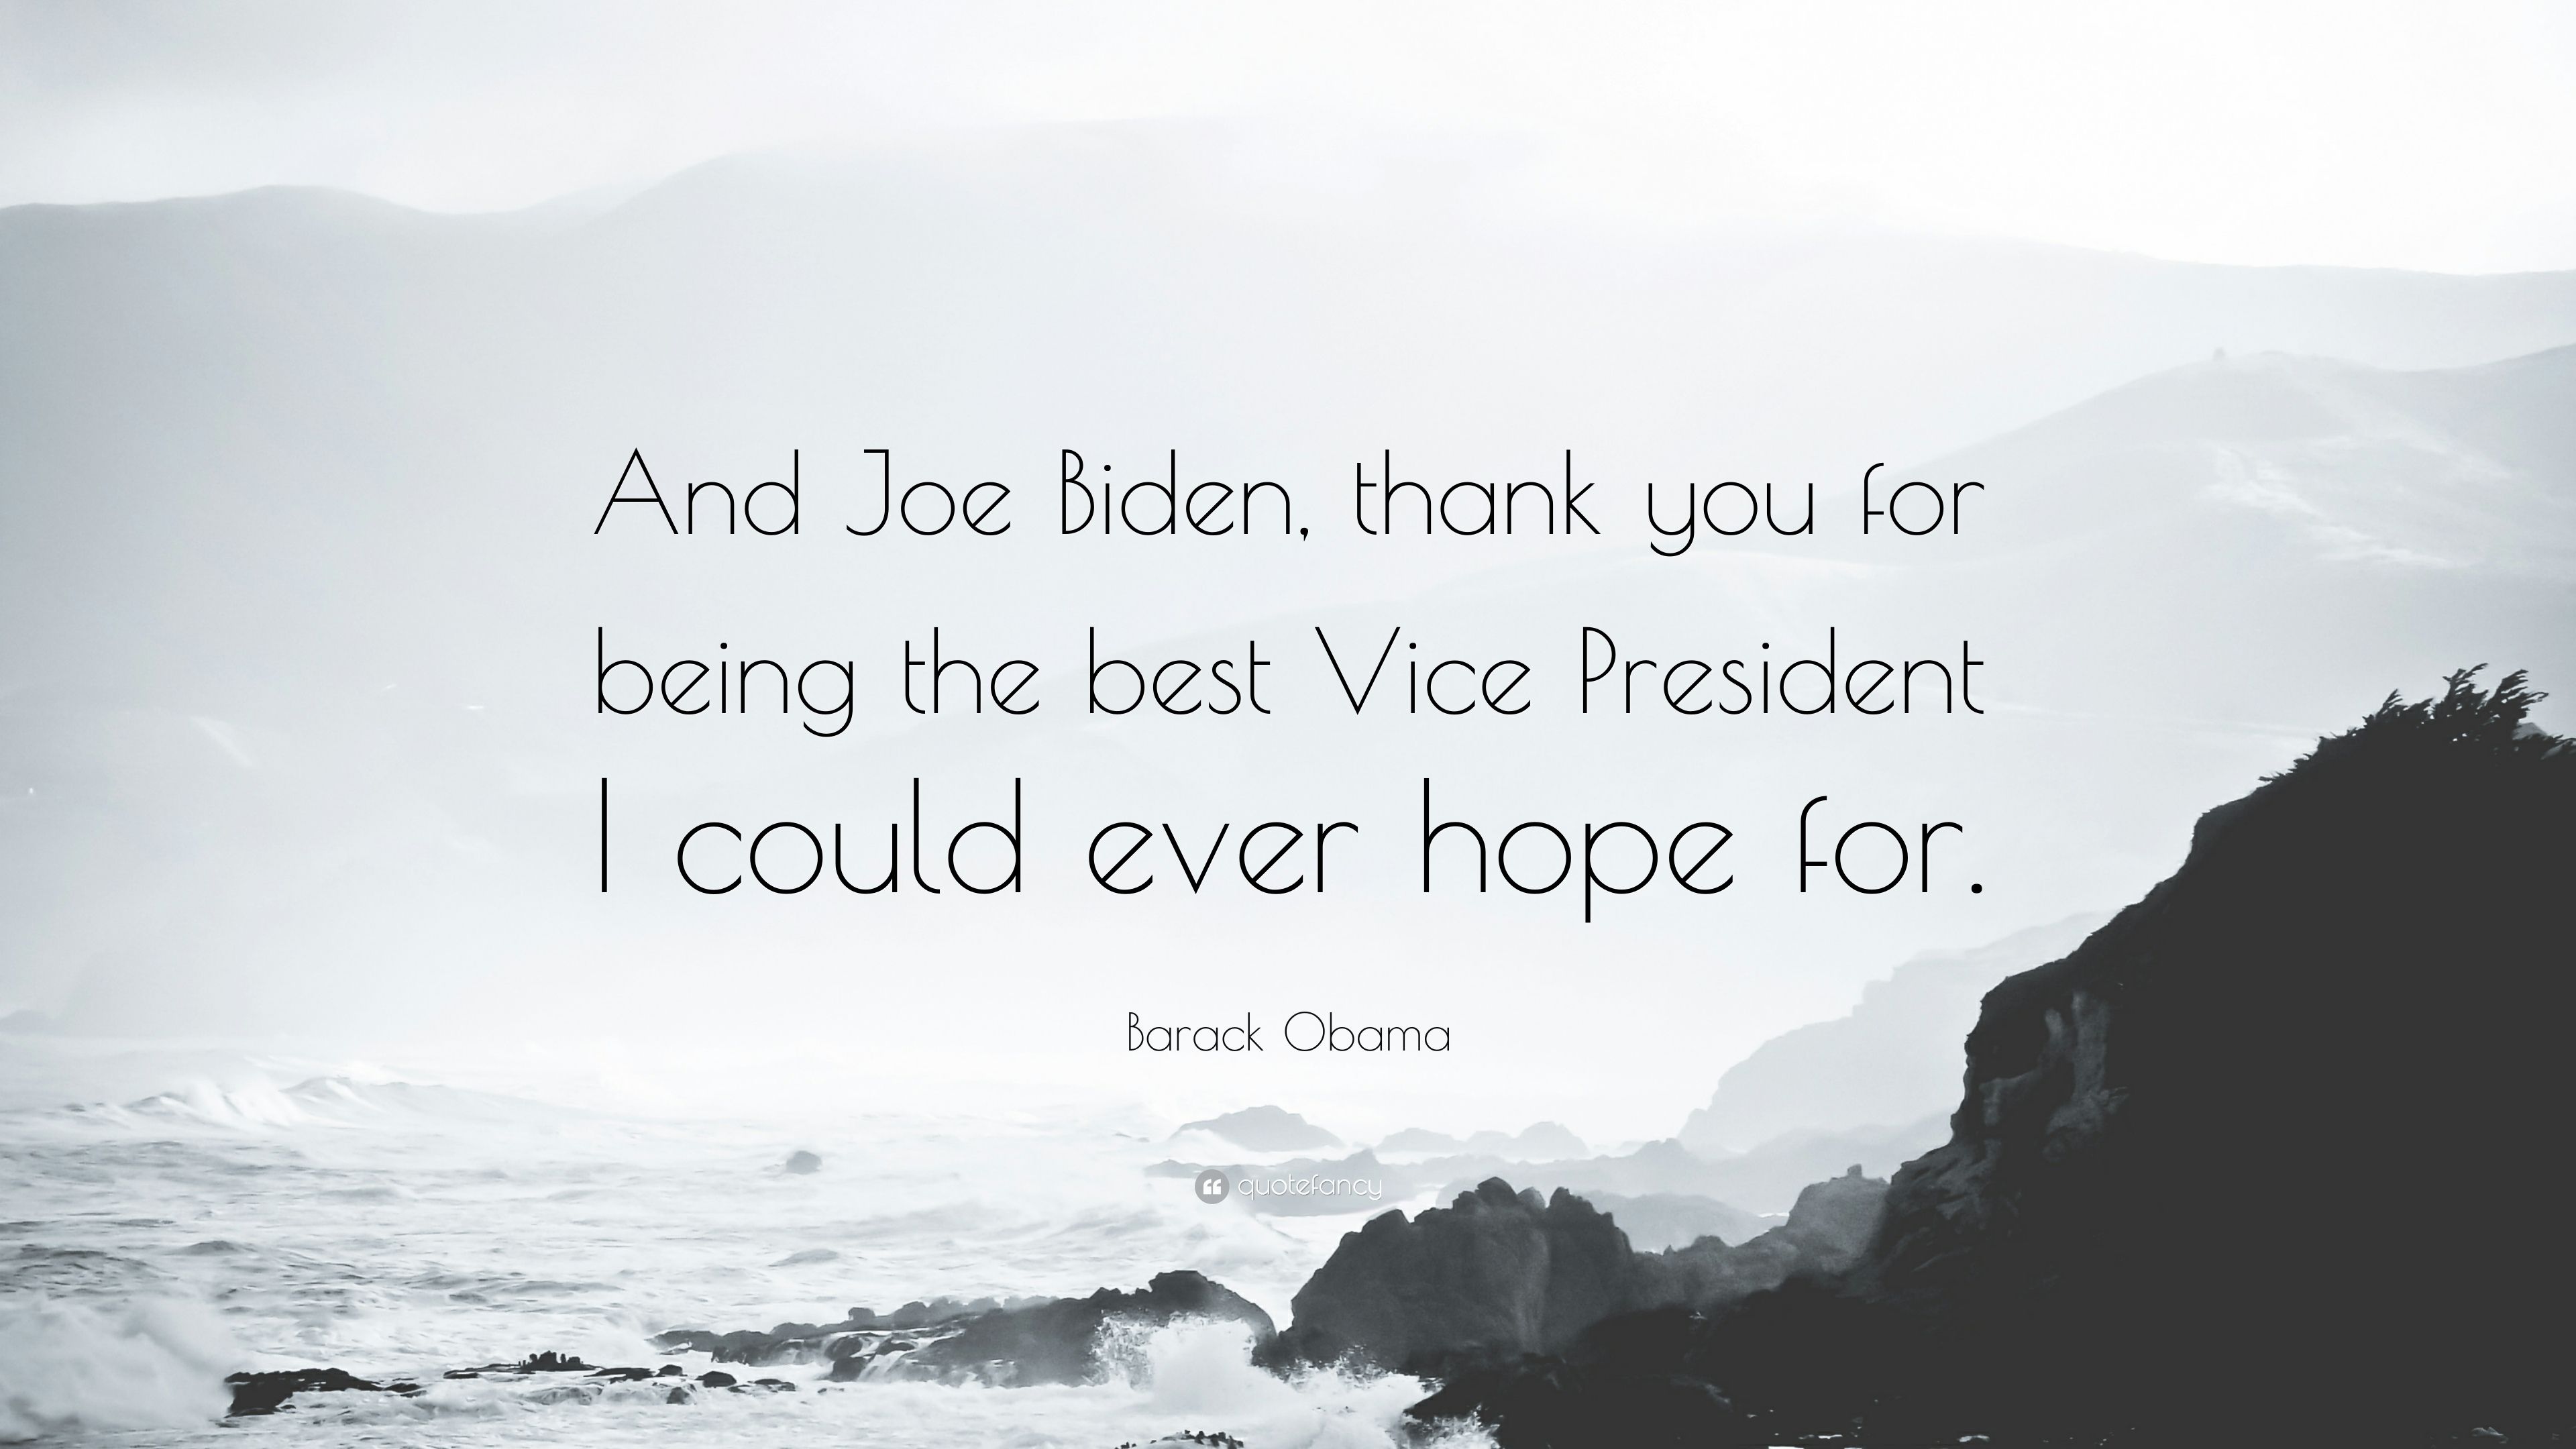 Barack Obama Quote: “And Joe Biden, thank you for being the best